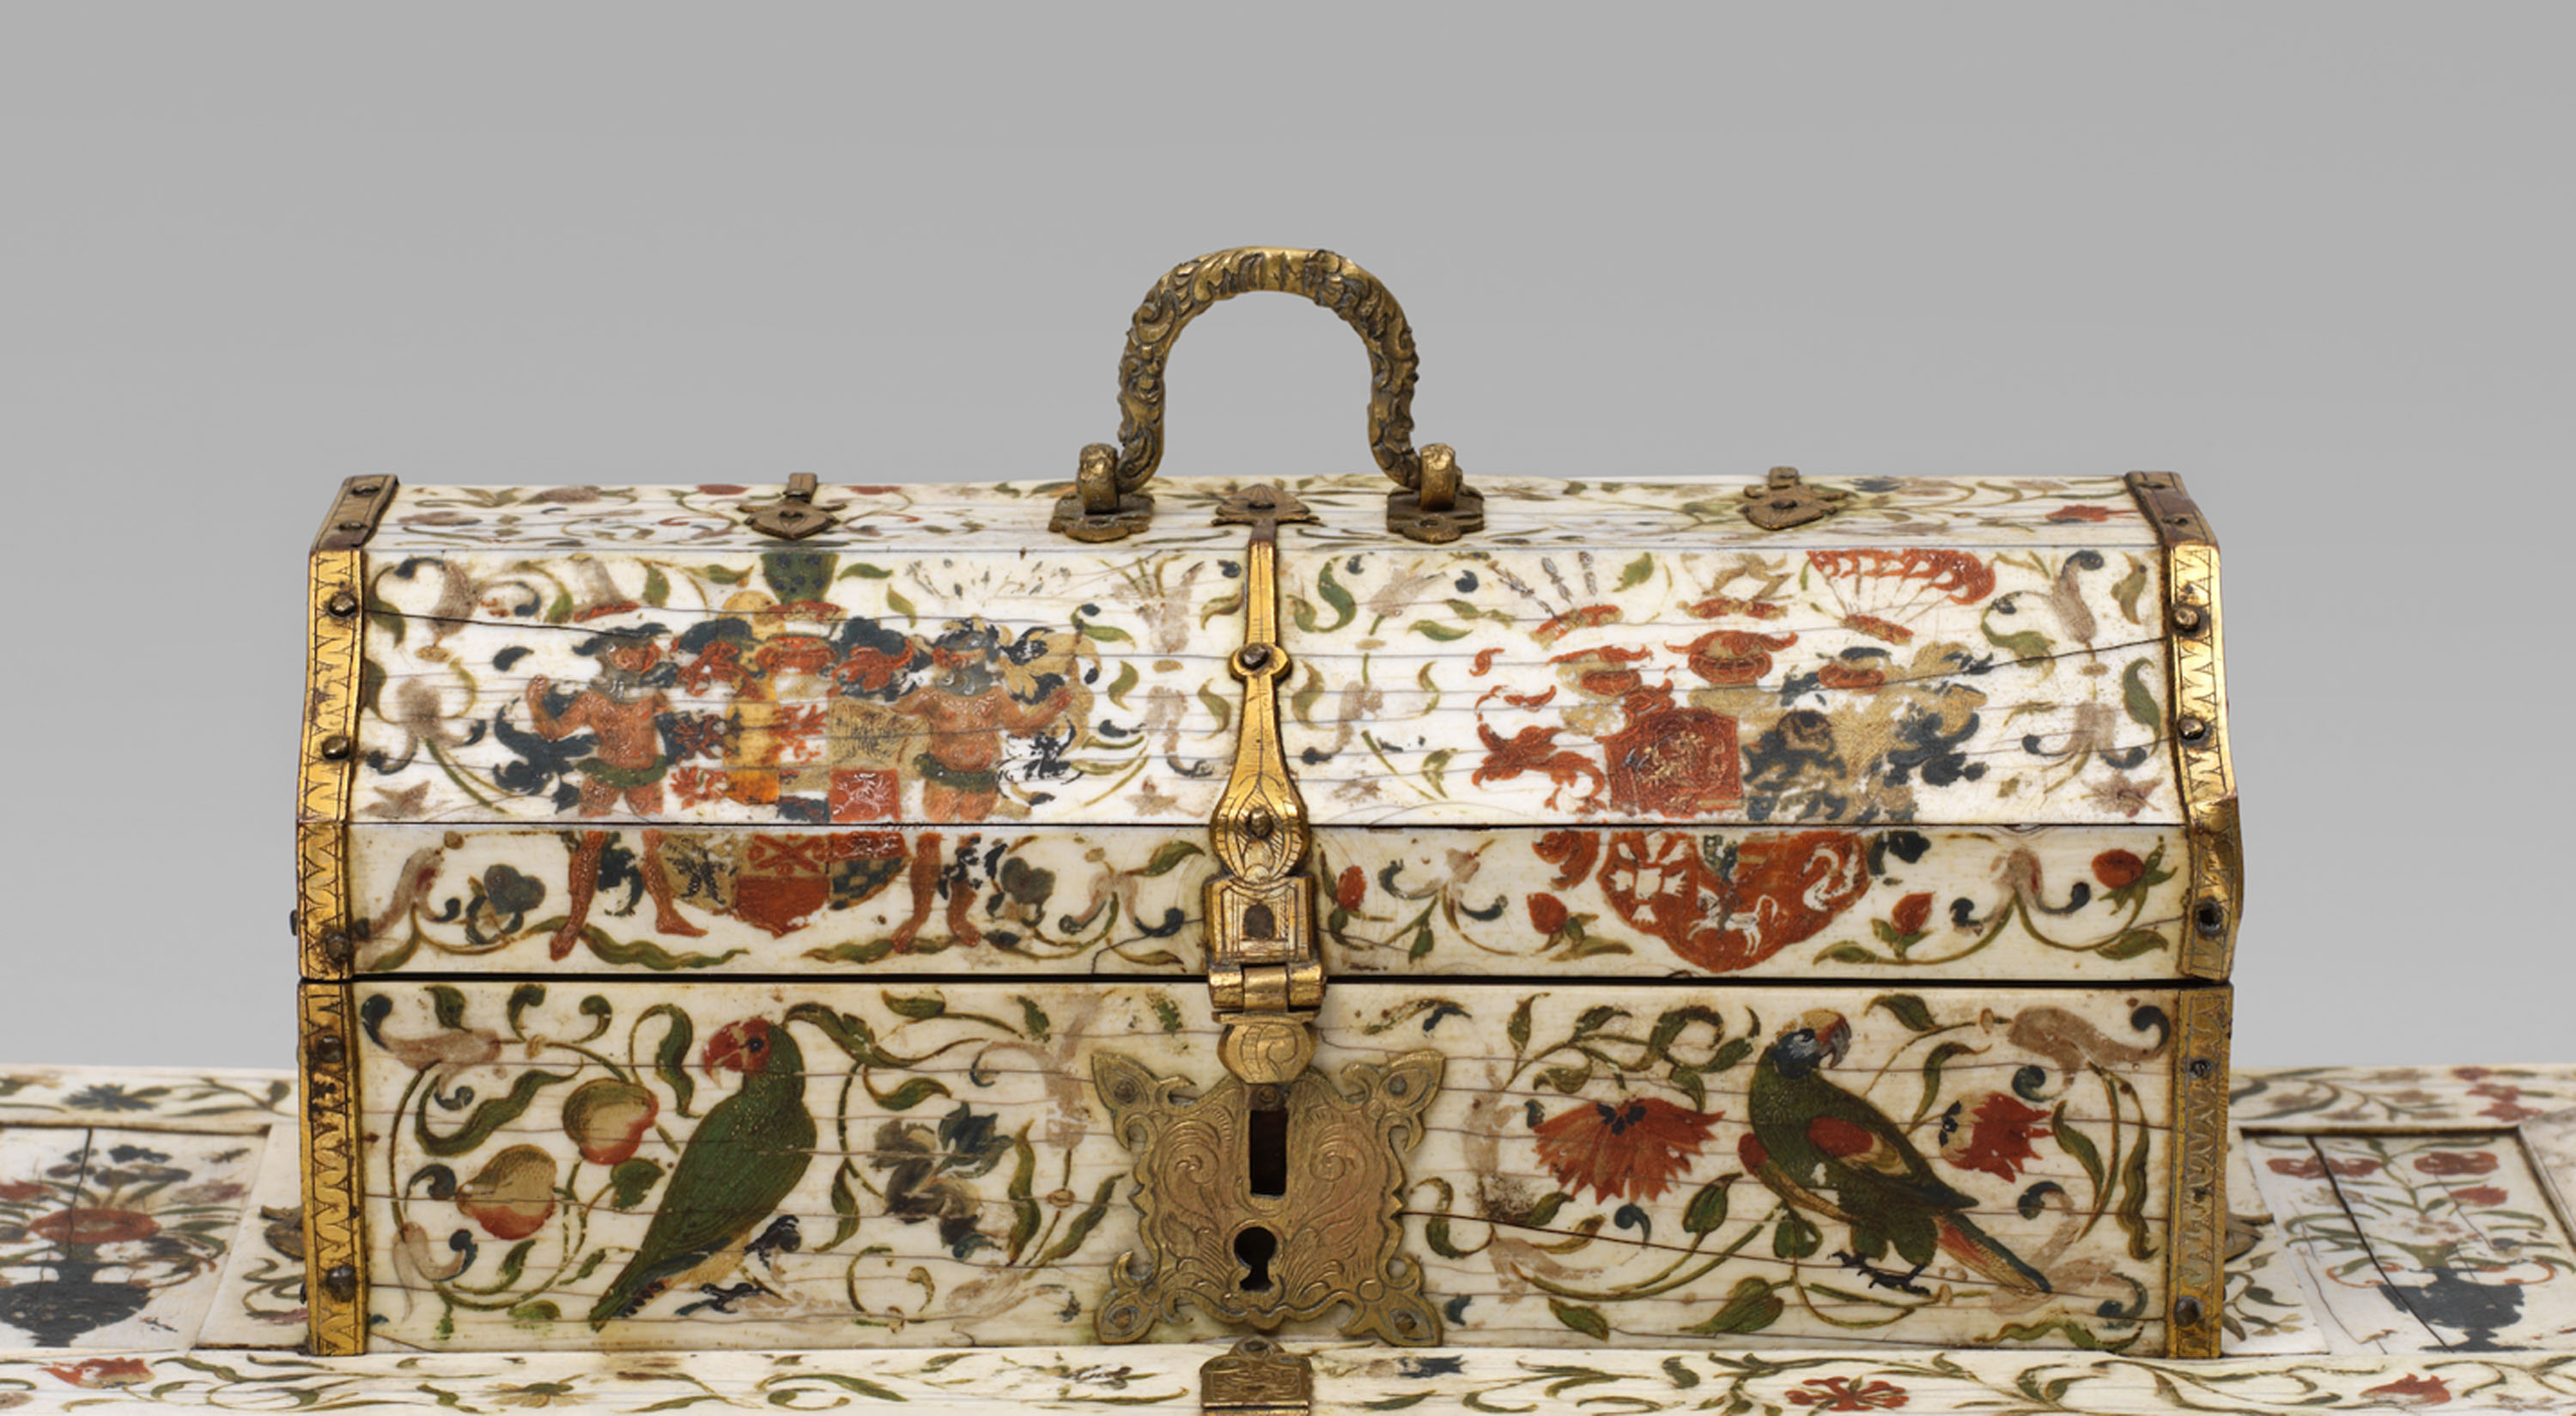 The front of the box features two family coats of arms. © The Samuel Courtauld Trust, The Courtauld Gallery, London.